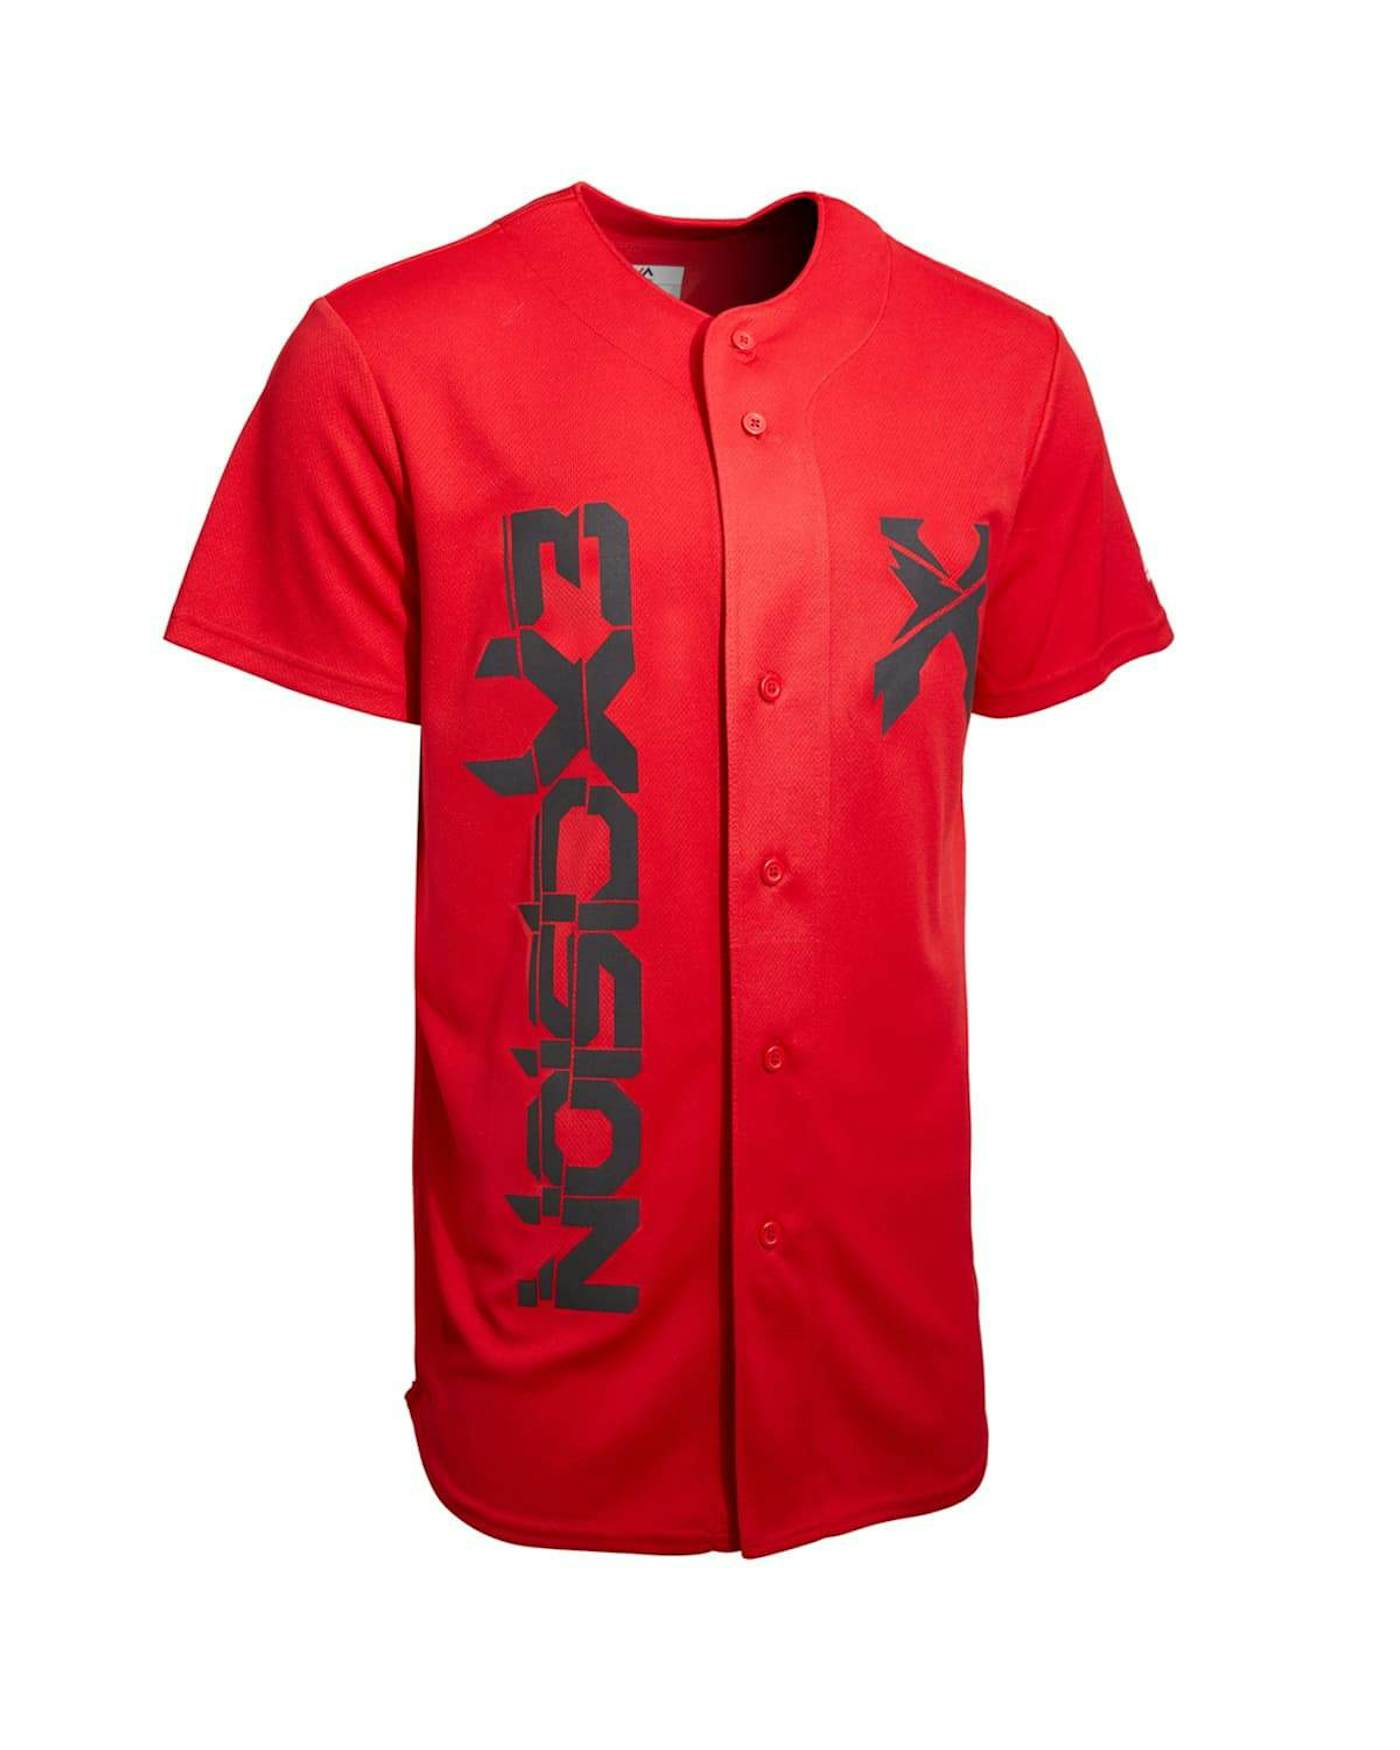 Excision 'Reversible Home Robot' Baseball Jersey (Red/Blue)